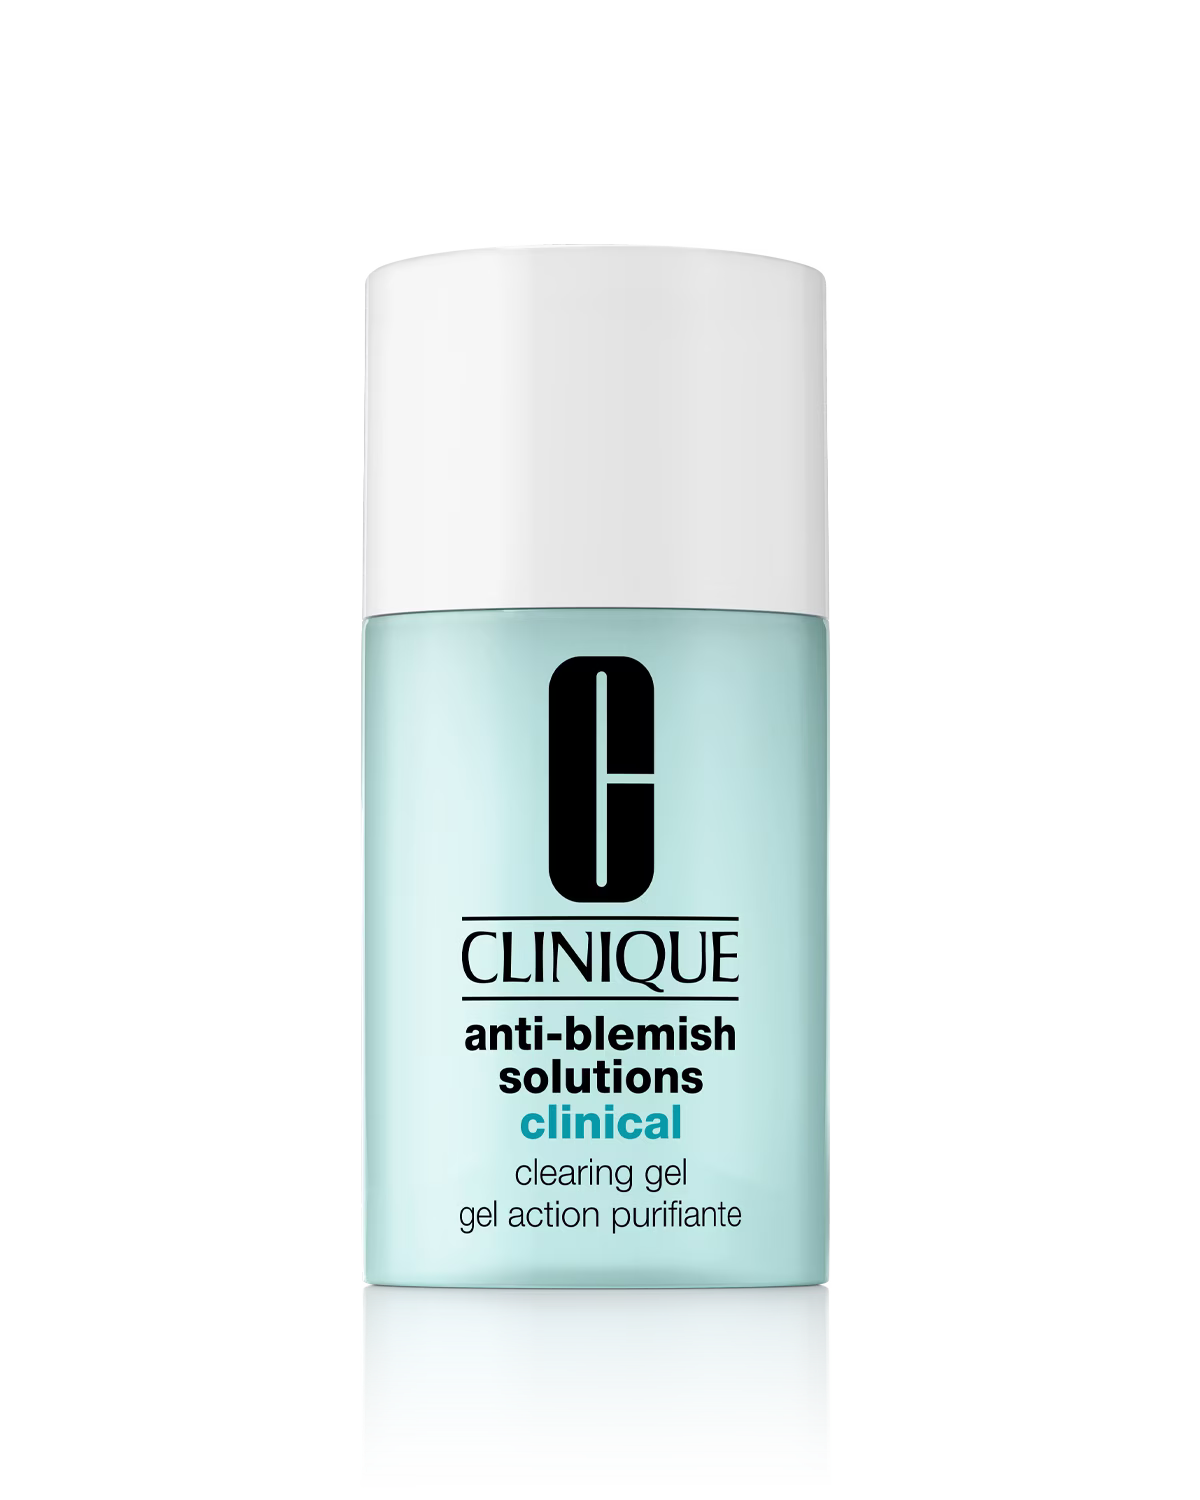 CLINIQUE Anti-Blemish Solutions Clinical Clearing Gel 15mL